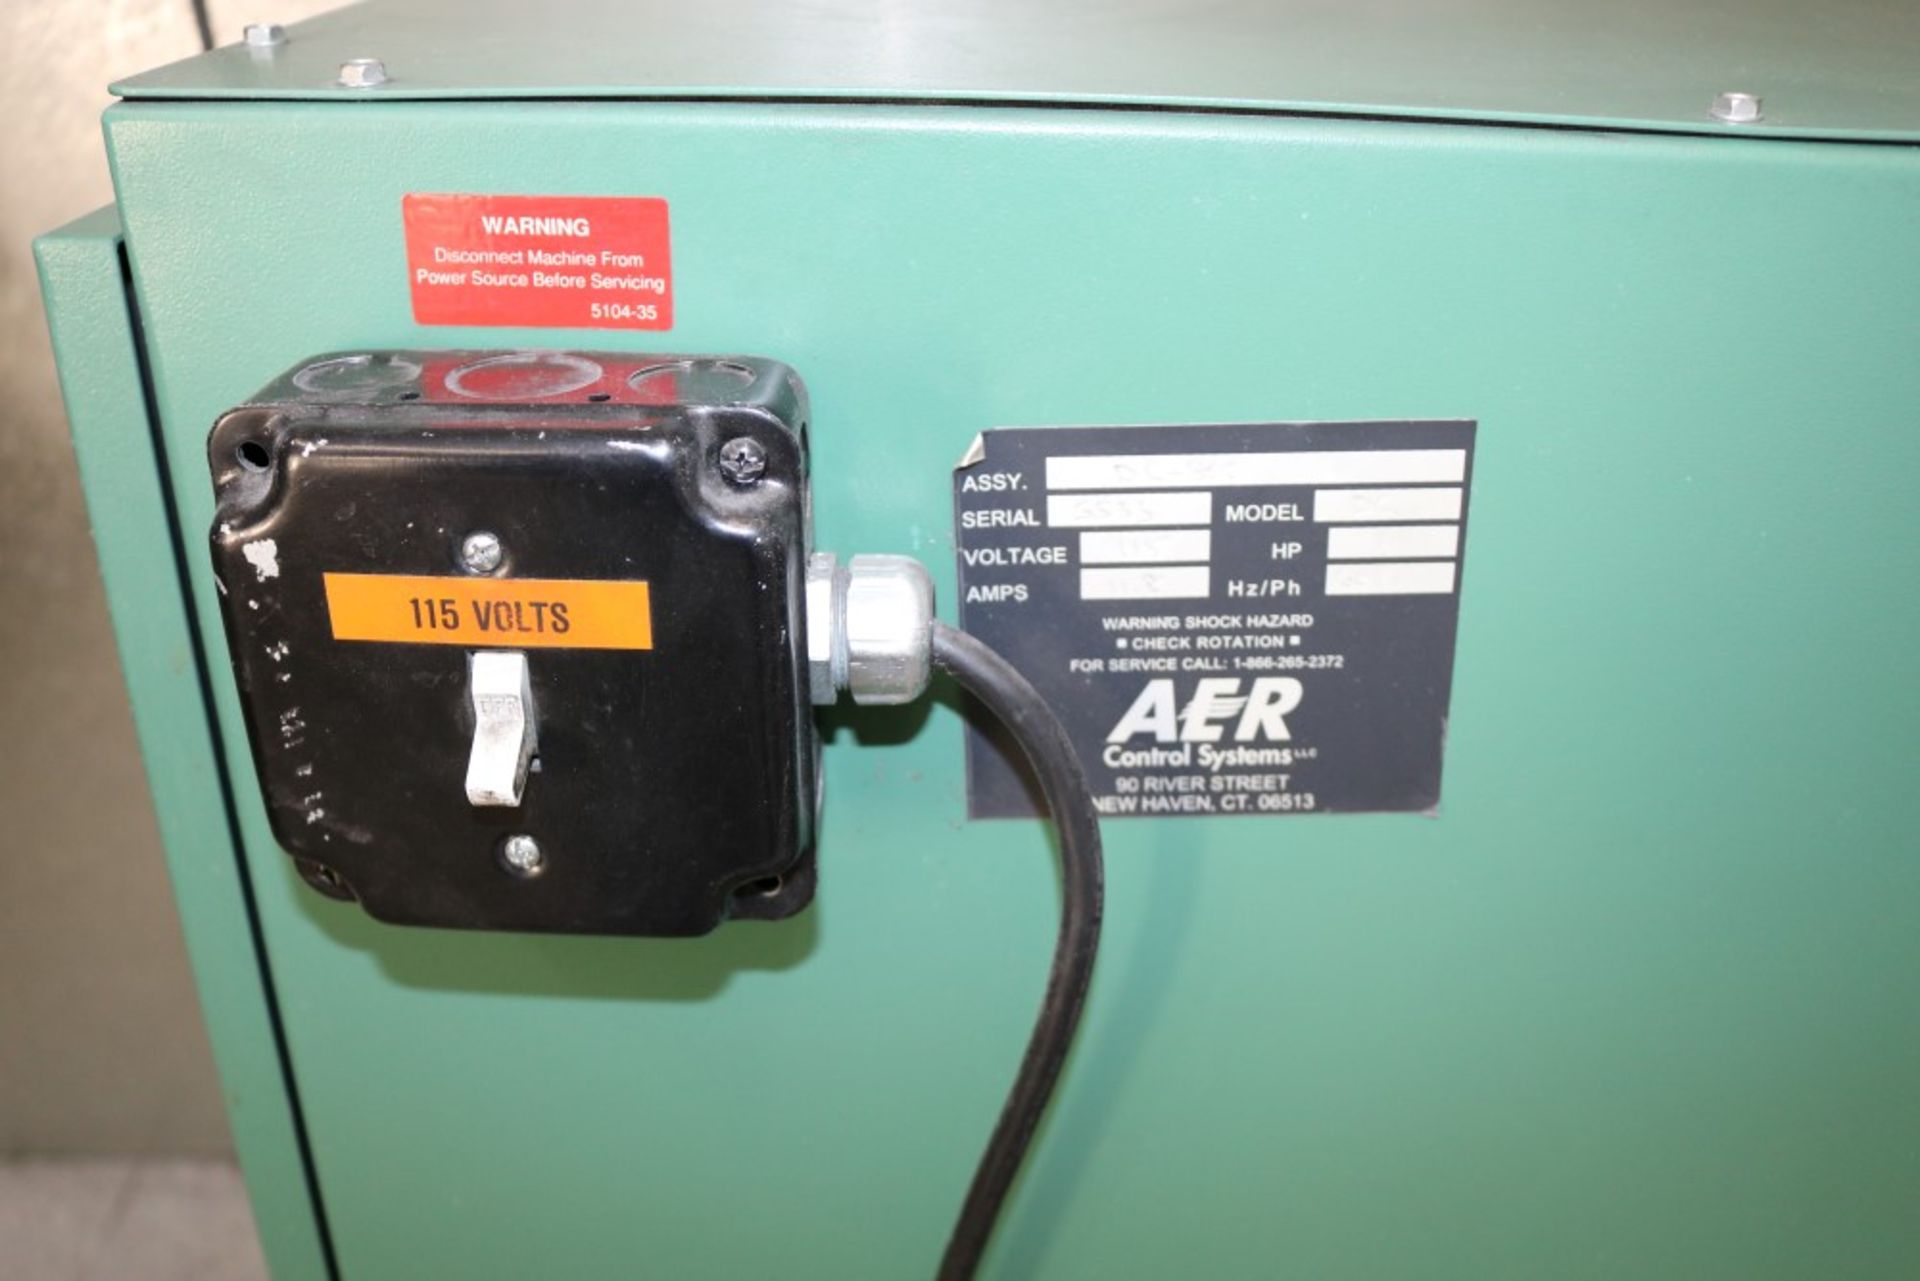 AER Control Systems Air Filter, Model DC-800, SN 5533, 1 HP - Image 3 of 6